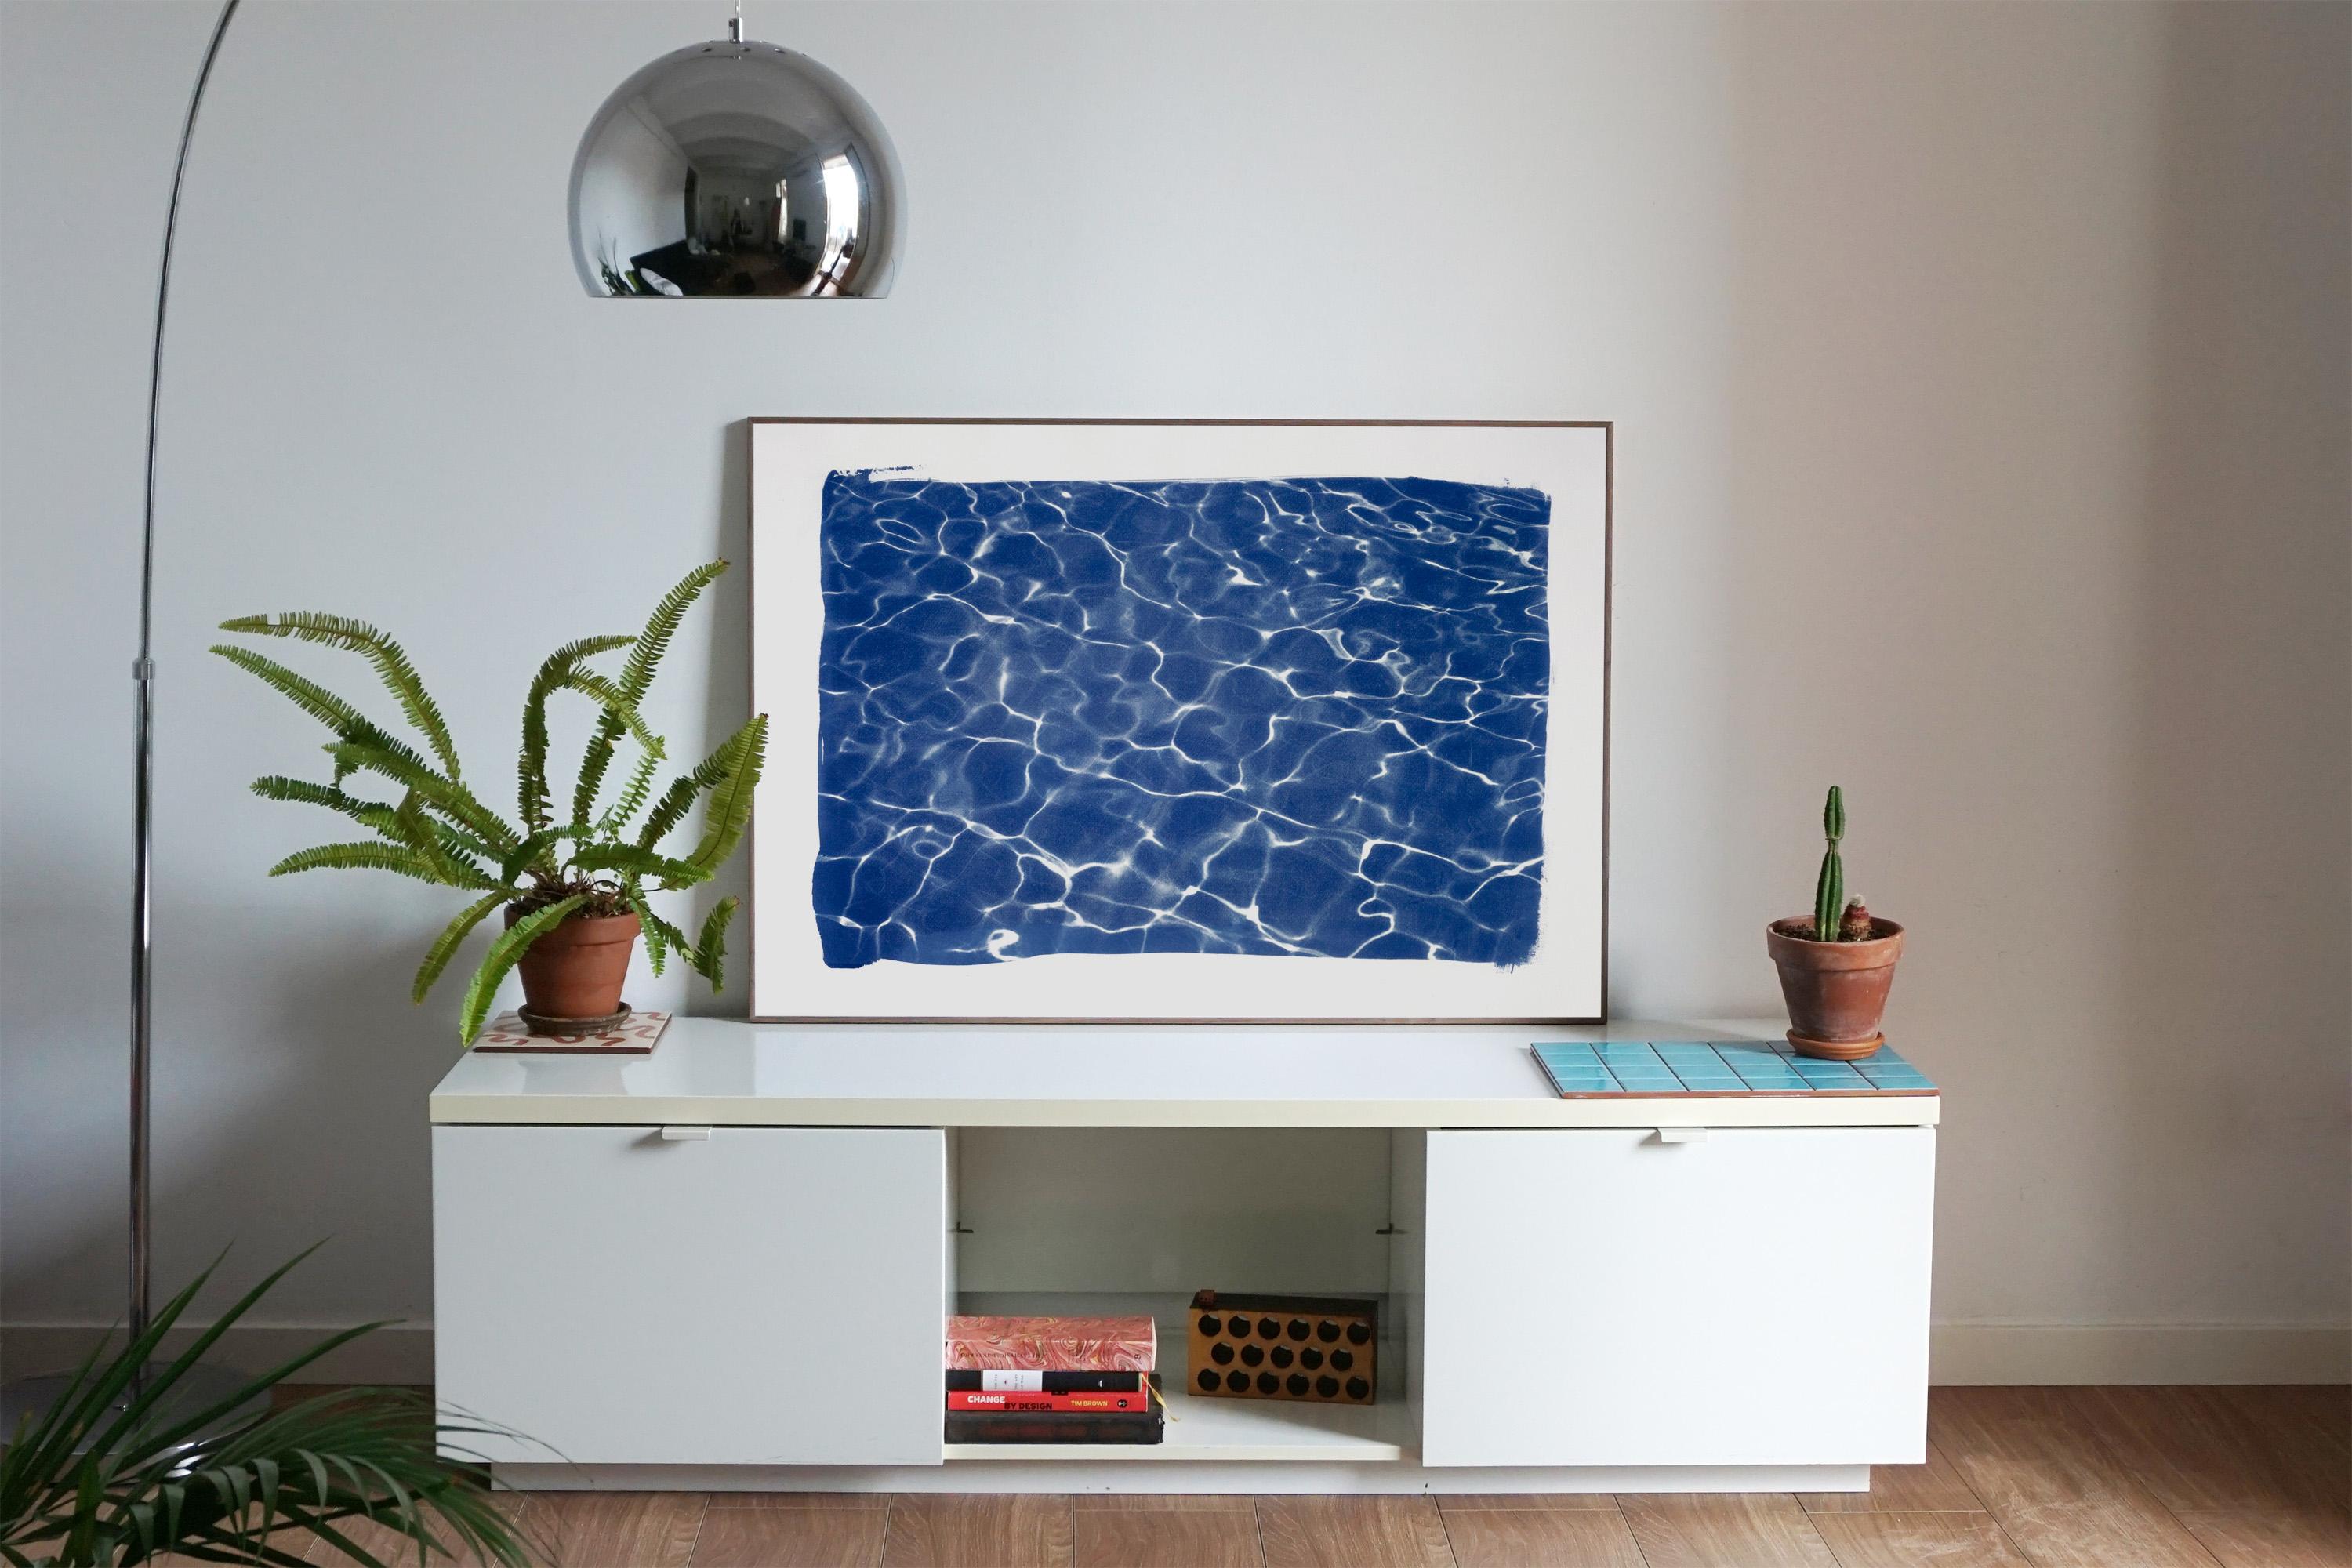 Hollywood Pool House Glow, Exclusive Handmade Cyanotype Print of Blue Patterns - Art by Kind of Cyan